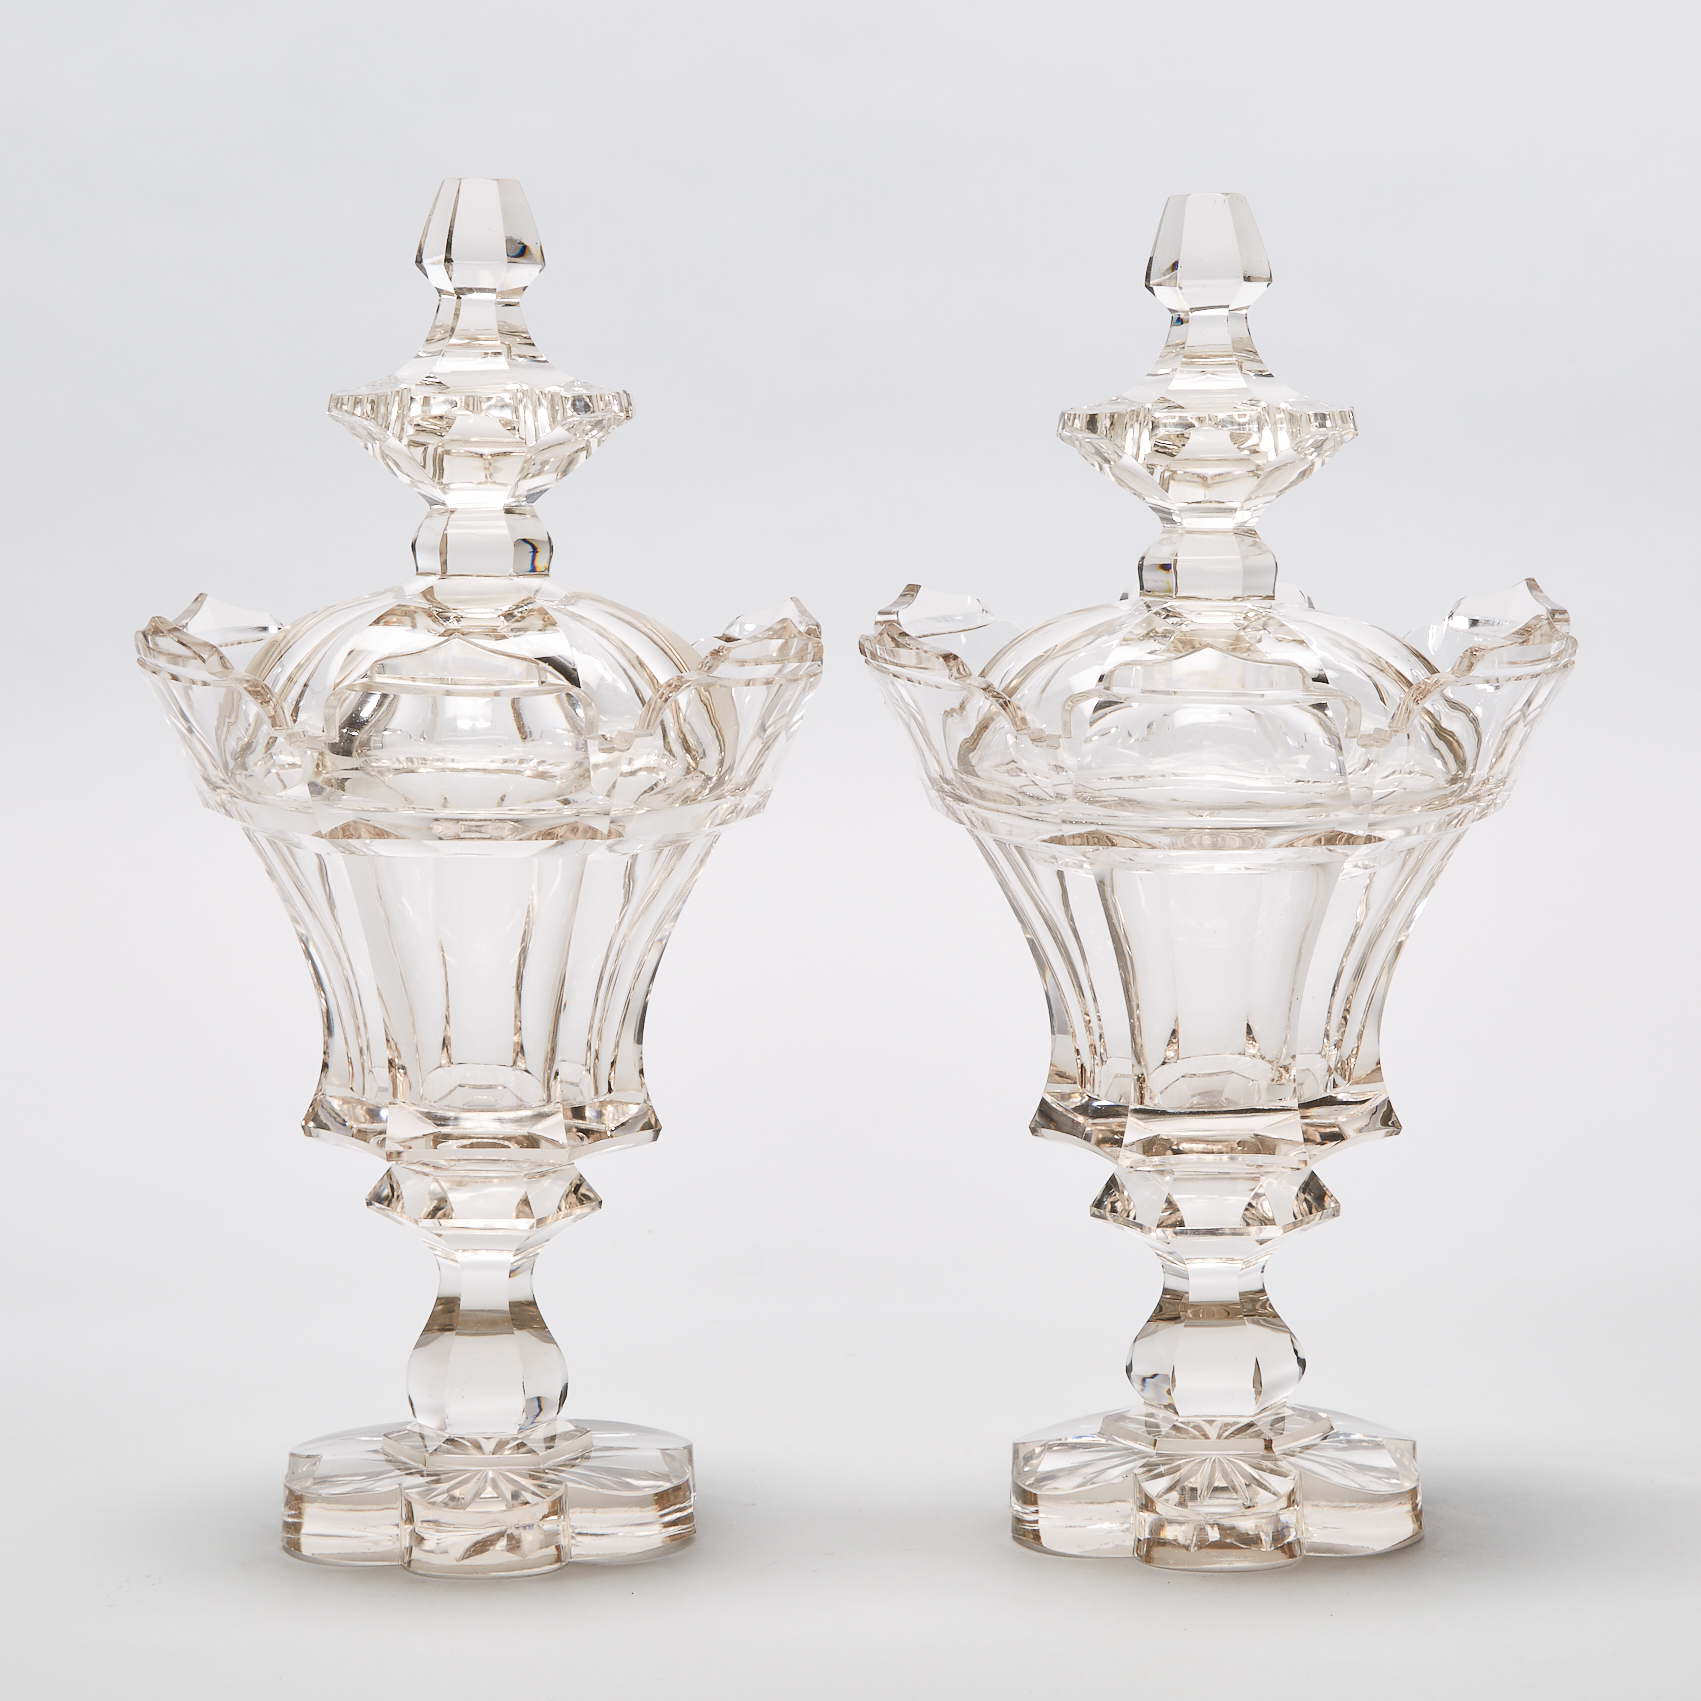 Pair of Continental Cut Glass Sweetmeat Vases and Covers, 19th century